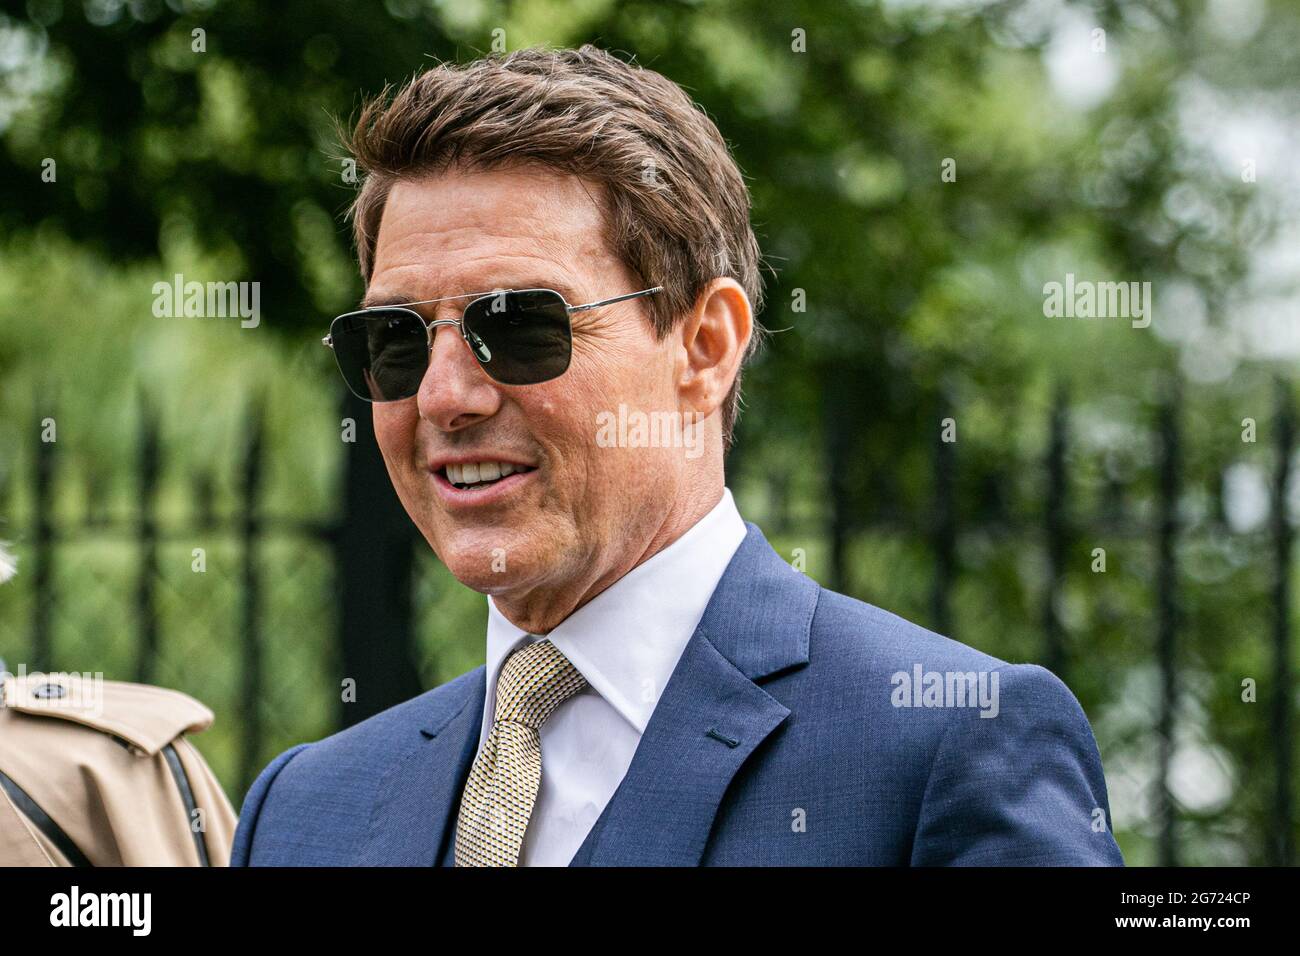 WIMBLEDON LONDON 10 July 2021. American Hollywood actor Tom Cruise arrives  on day 12 of the Wimbledon Championships for the Ladies's singles final day  at The All England Lawn Tennis Club. Credit